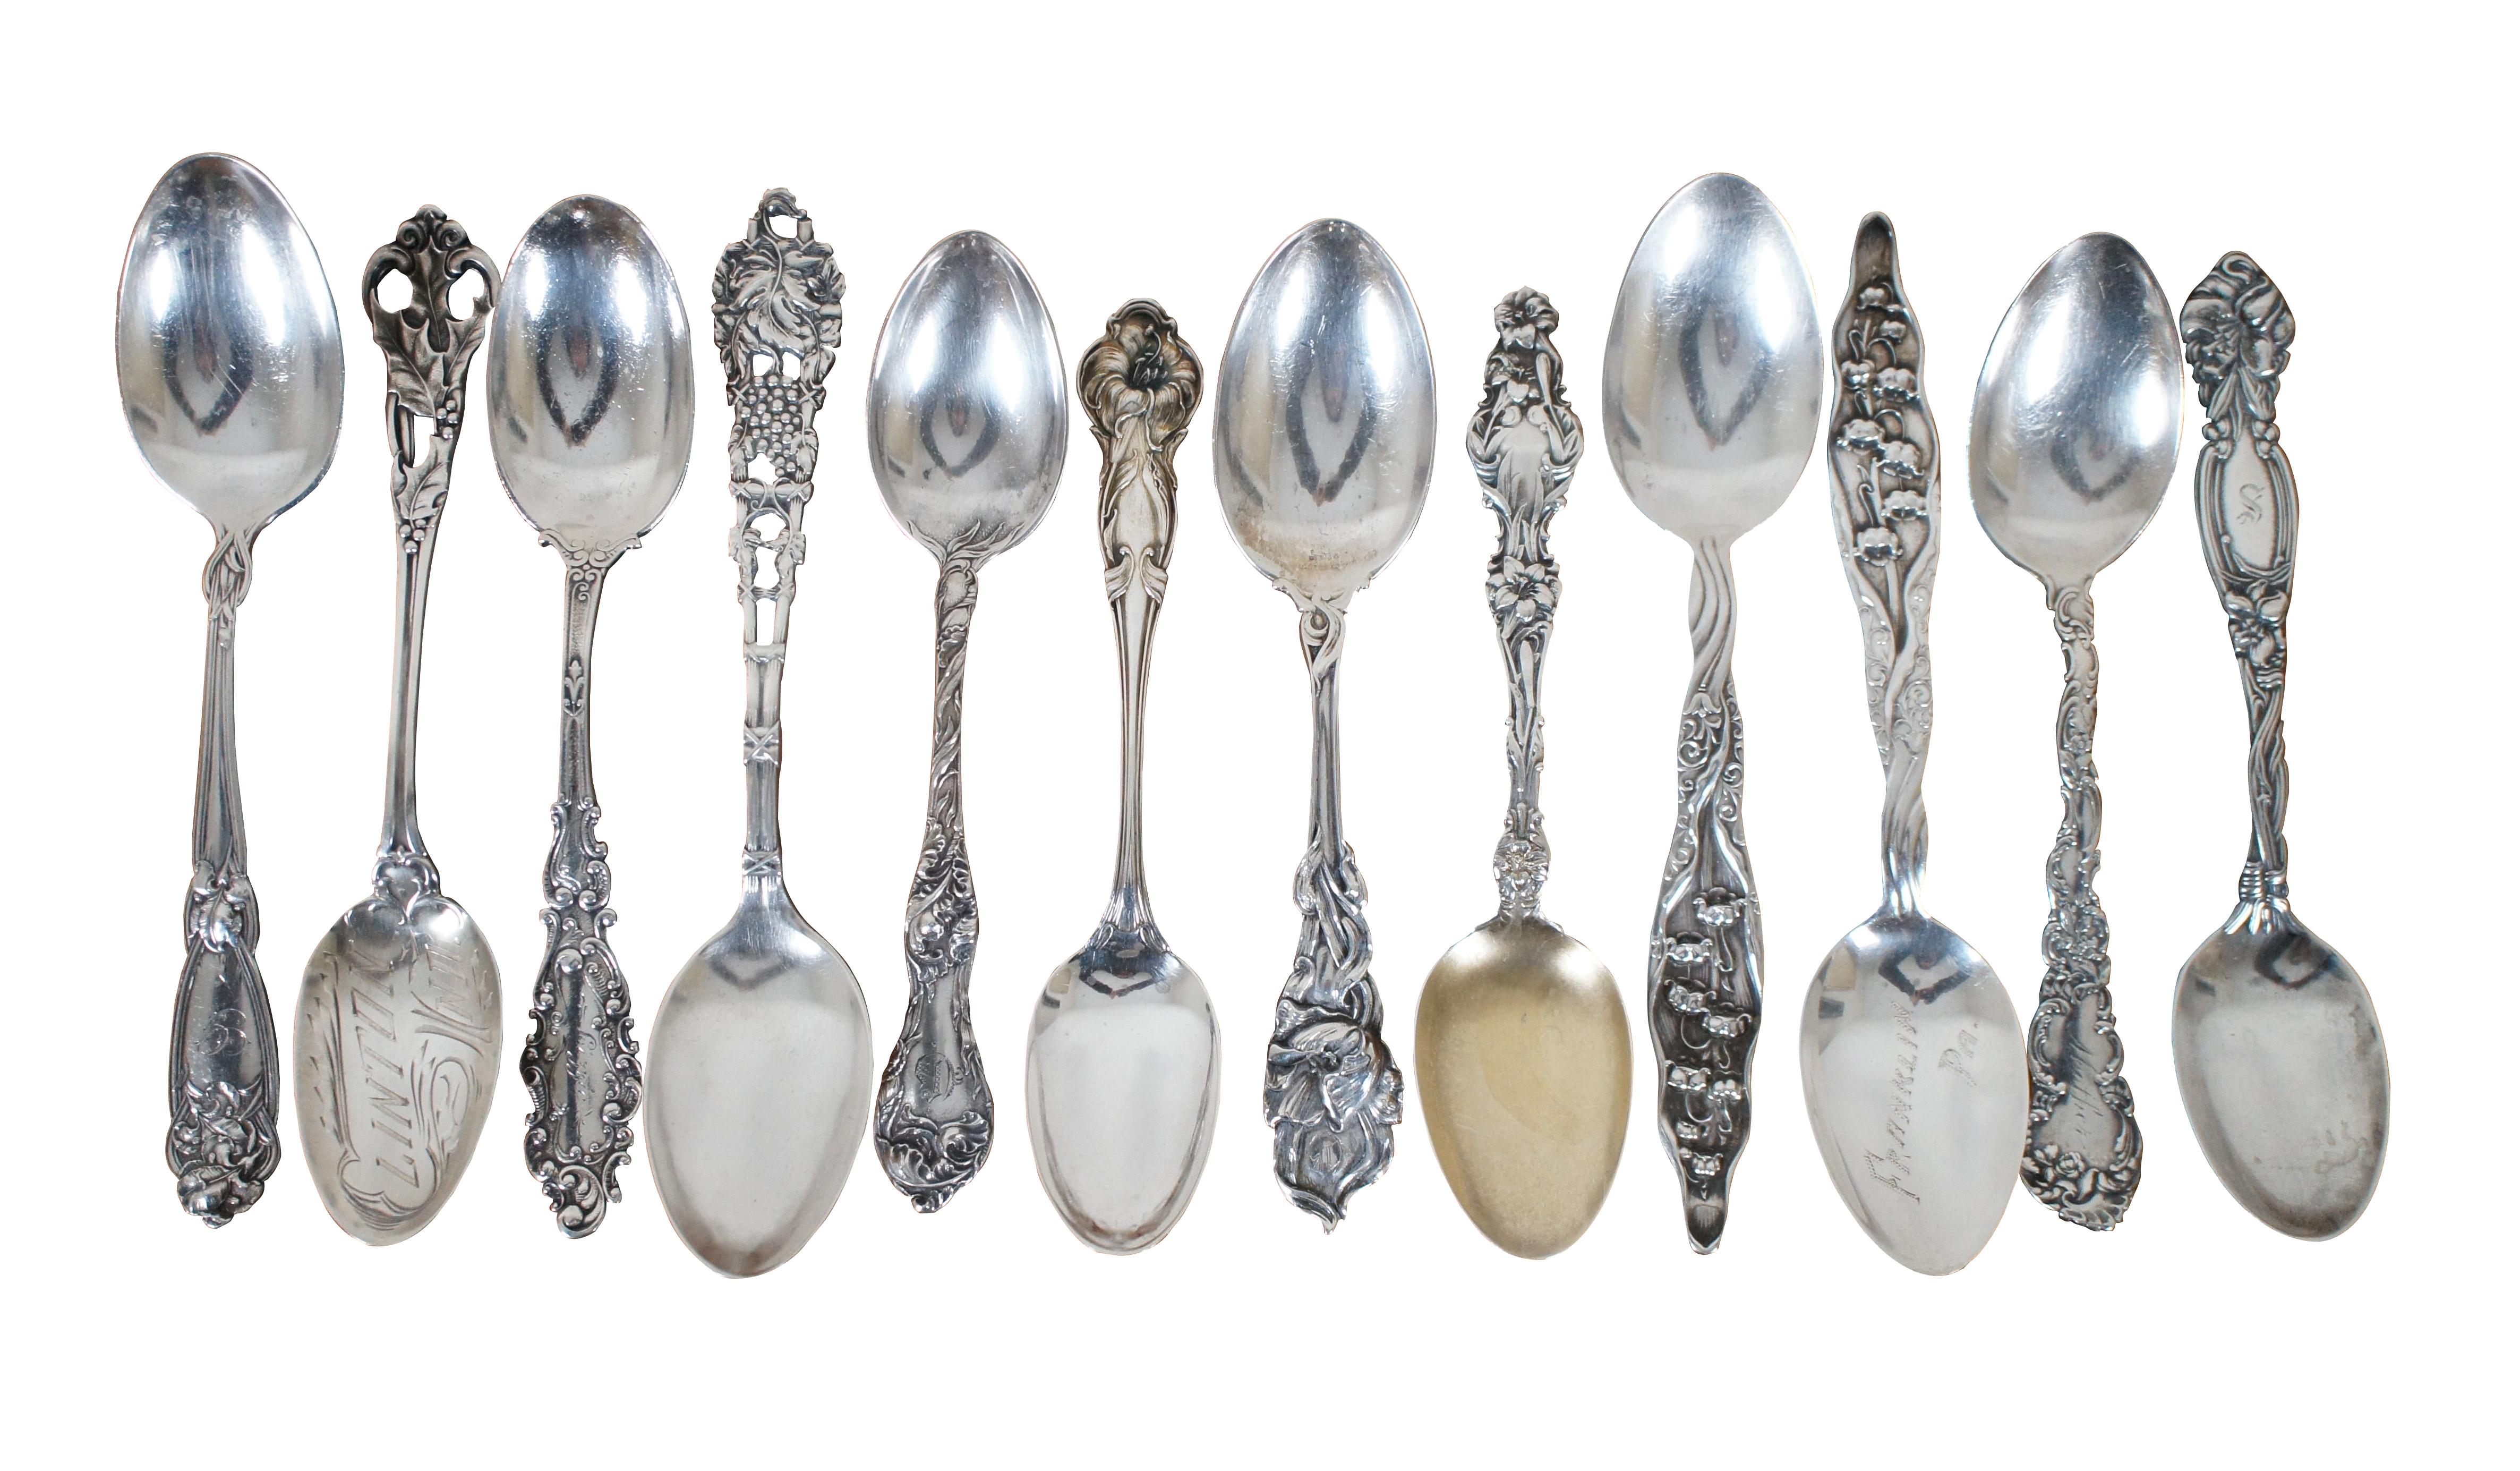 Lot of 12 assorted antique sterling silver tea spoons. Makers include Gorham, Simpson, Hall, & Miller, Alvin Corp, Fessenden & Co, Wendell Mfg Co, Reed & Barton, Paye & Baker, Whiting Mfg Co, and Robert Wallace & Sons.

Approx - 5.875” x 1.25”